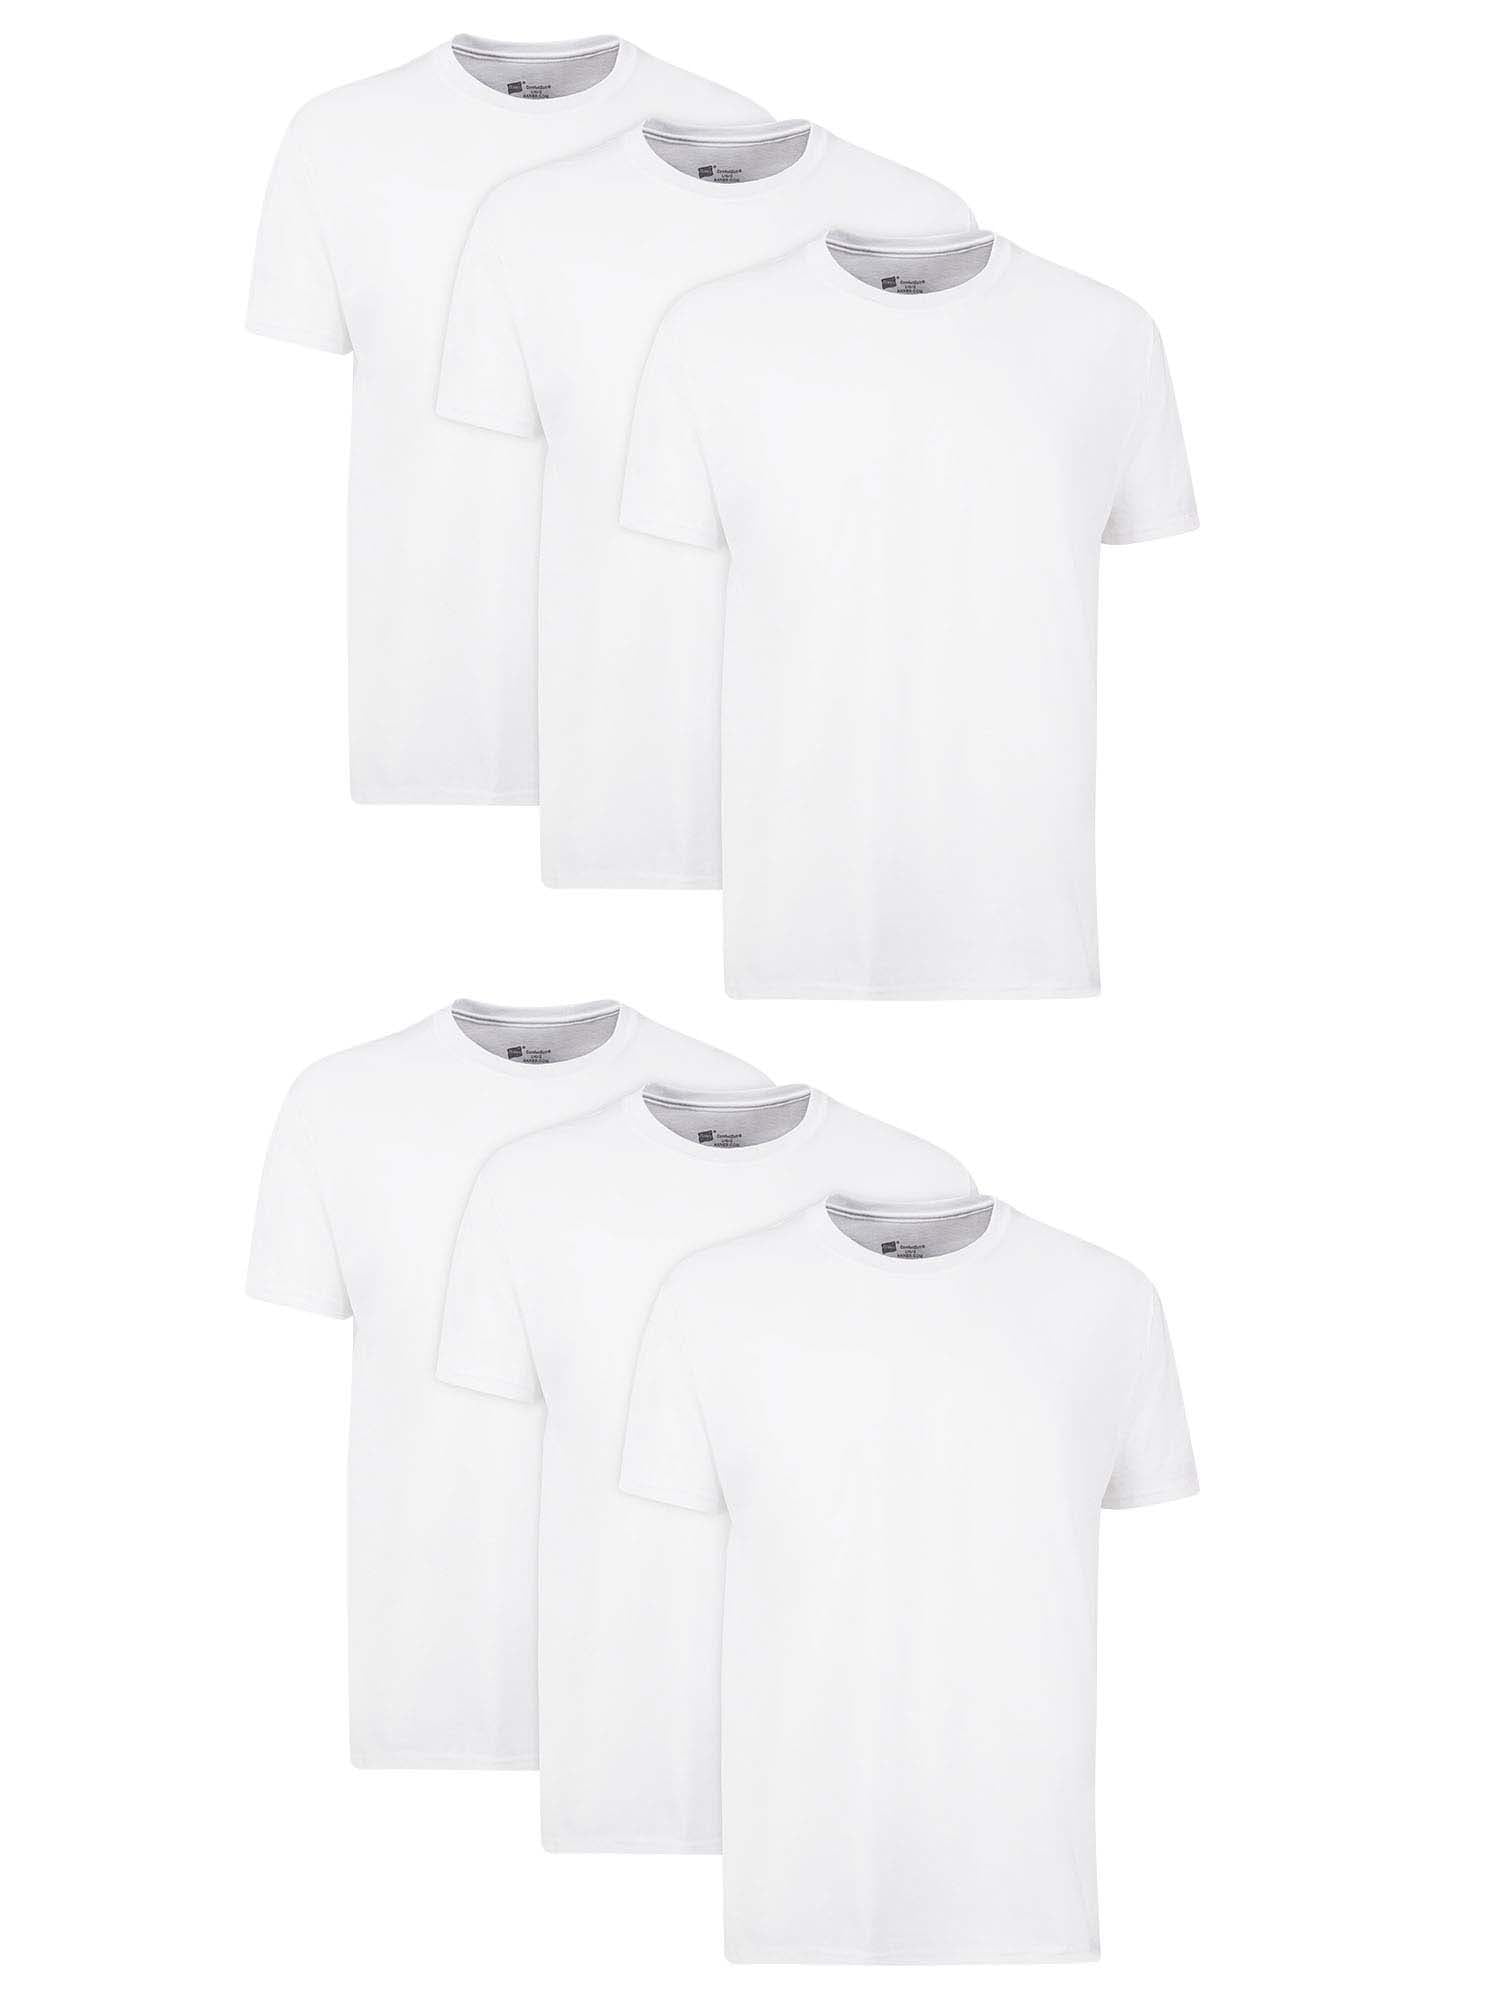 4 pack hanes mens t shirt white sizes S XL choose your size